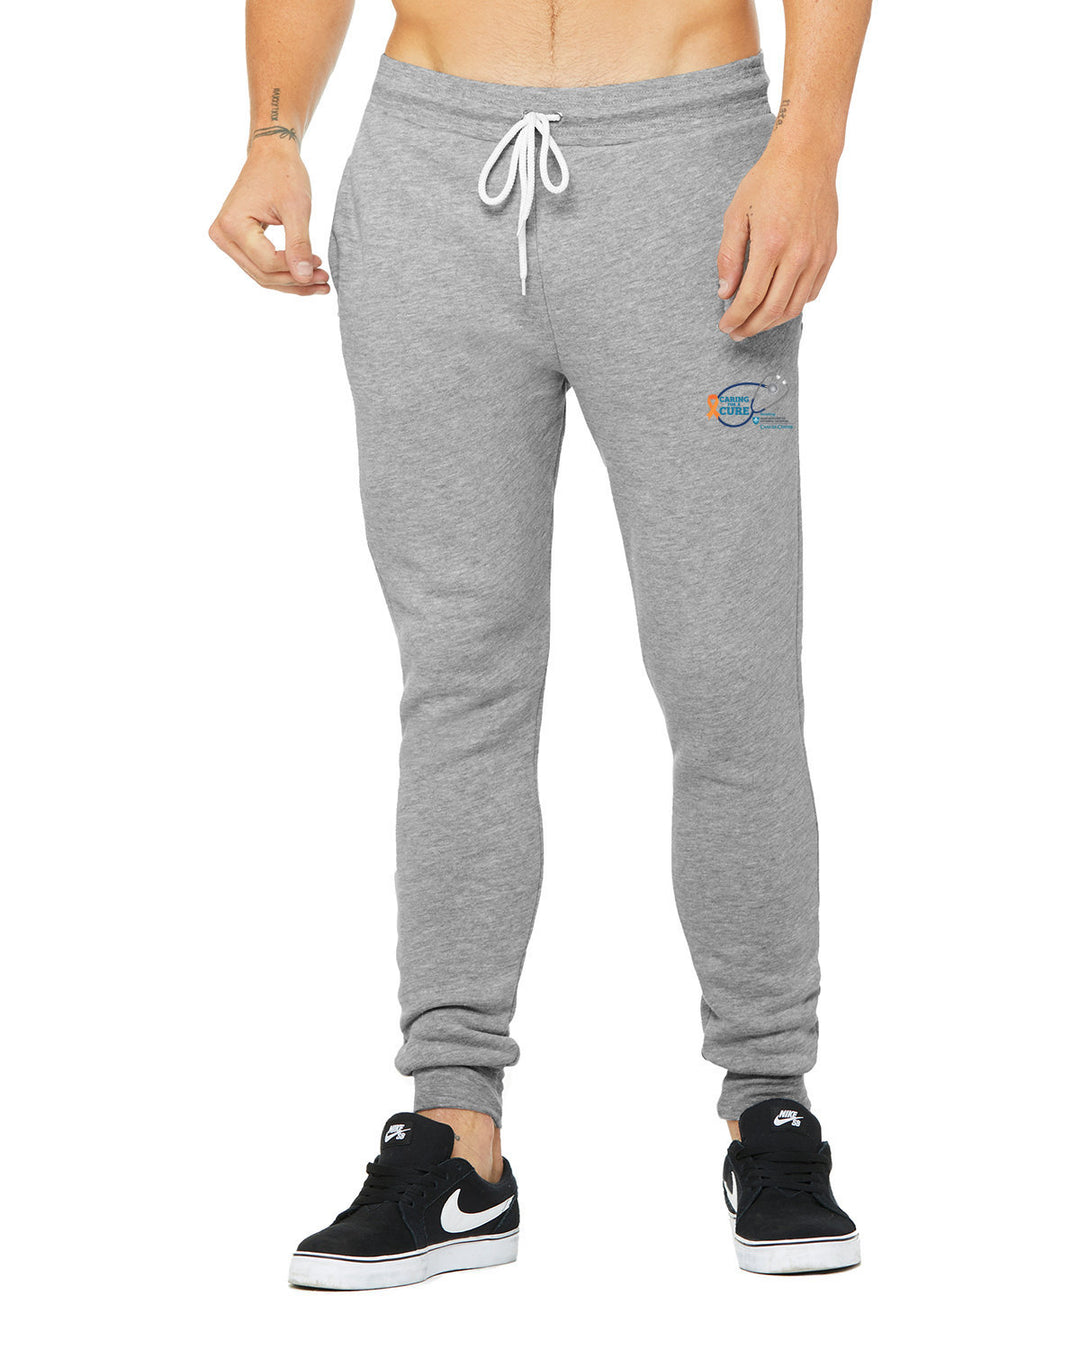 Caring for a Cure Jogger Sweatpants (3727)